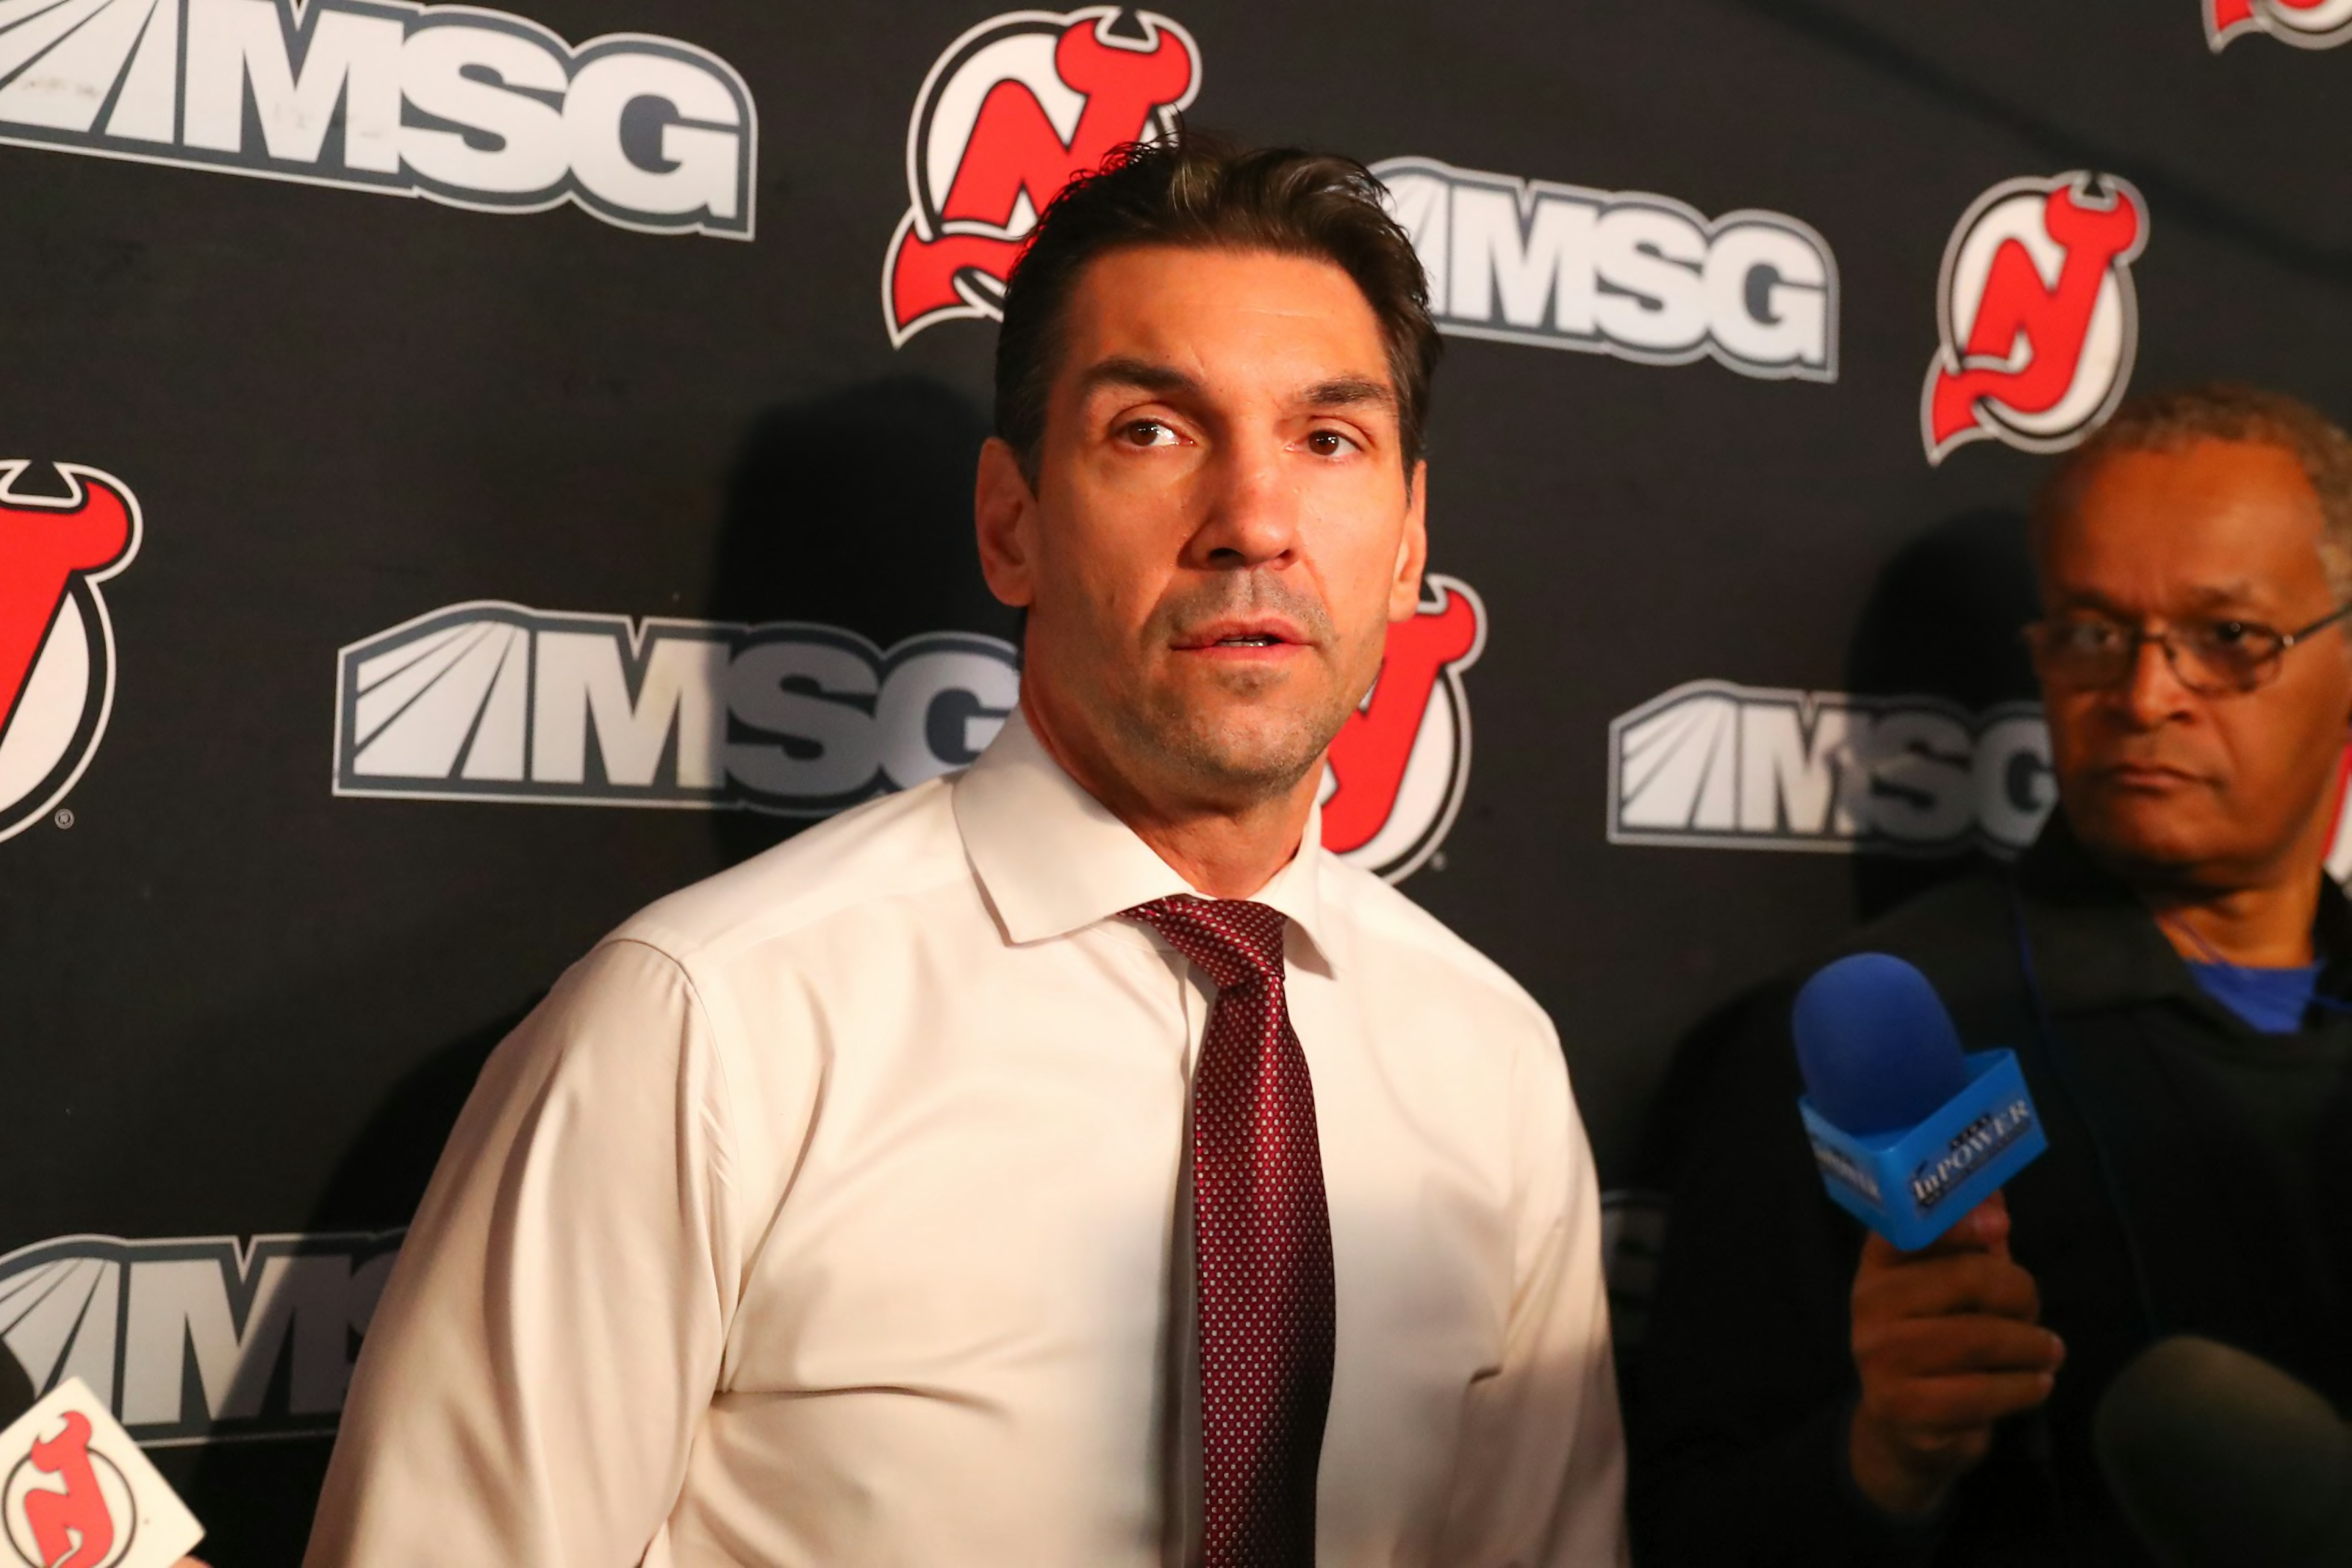 who is the coach of the new jersey devils